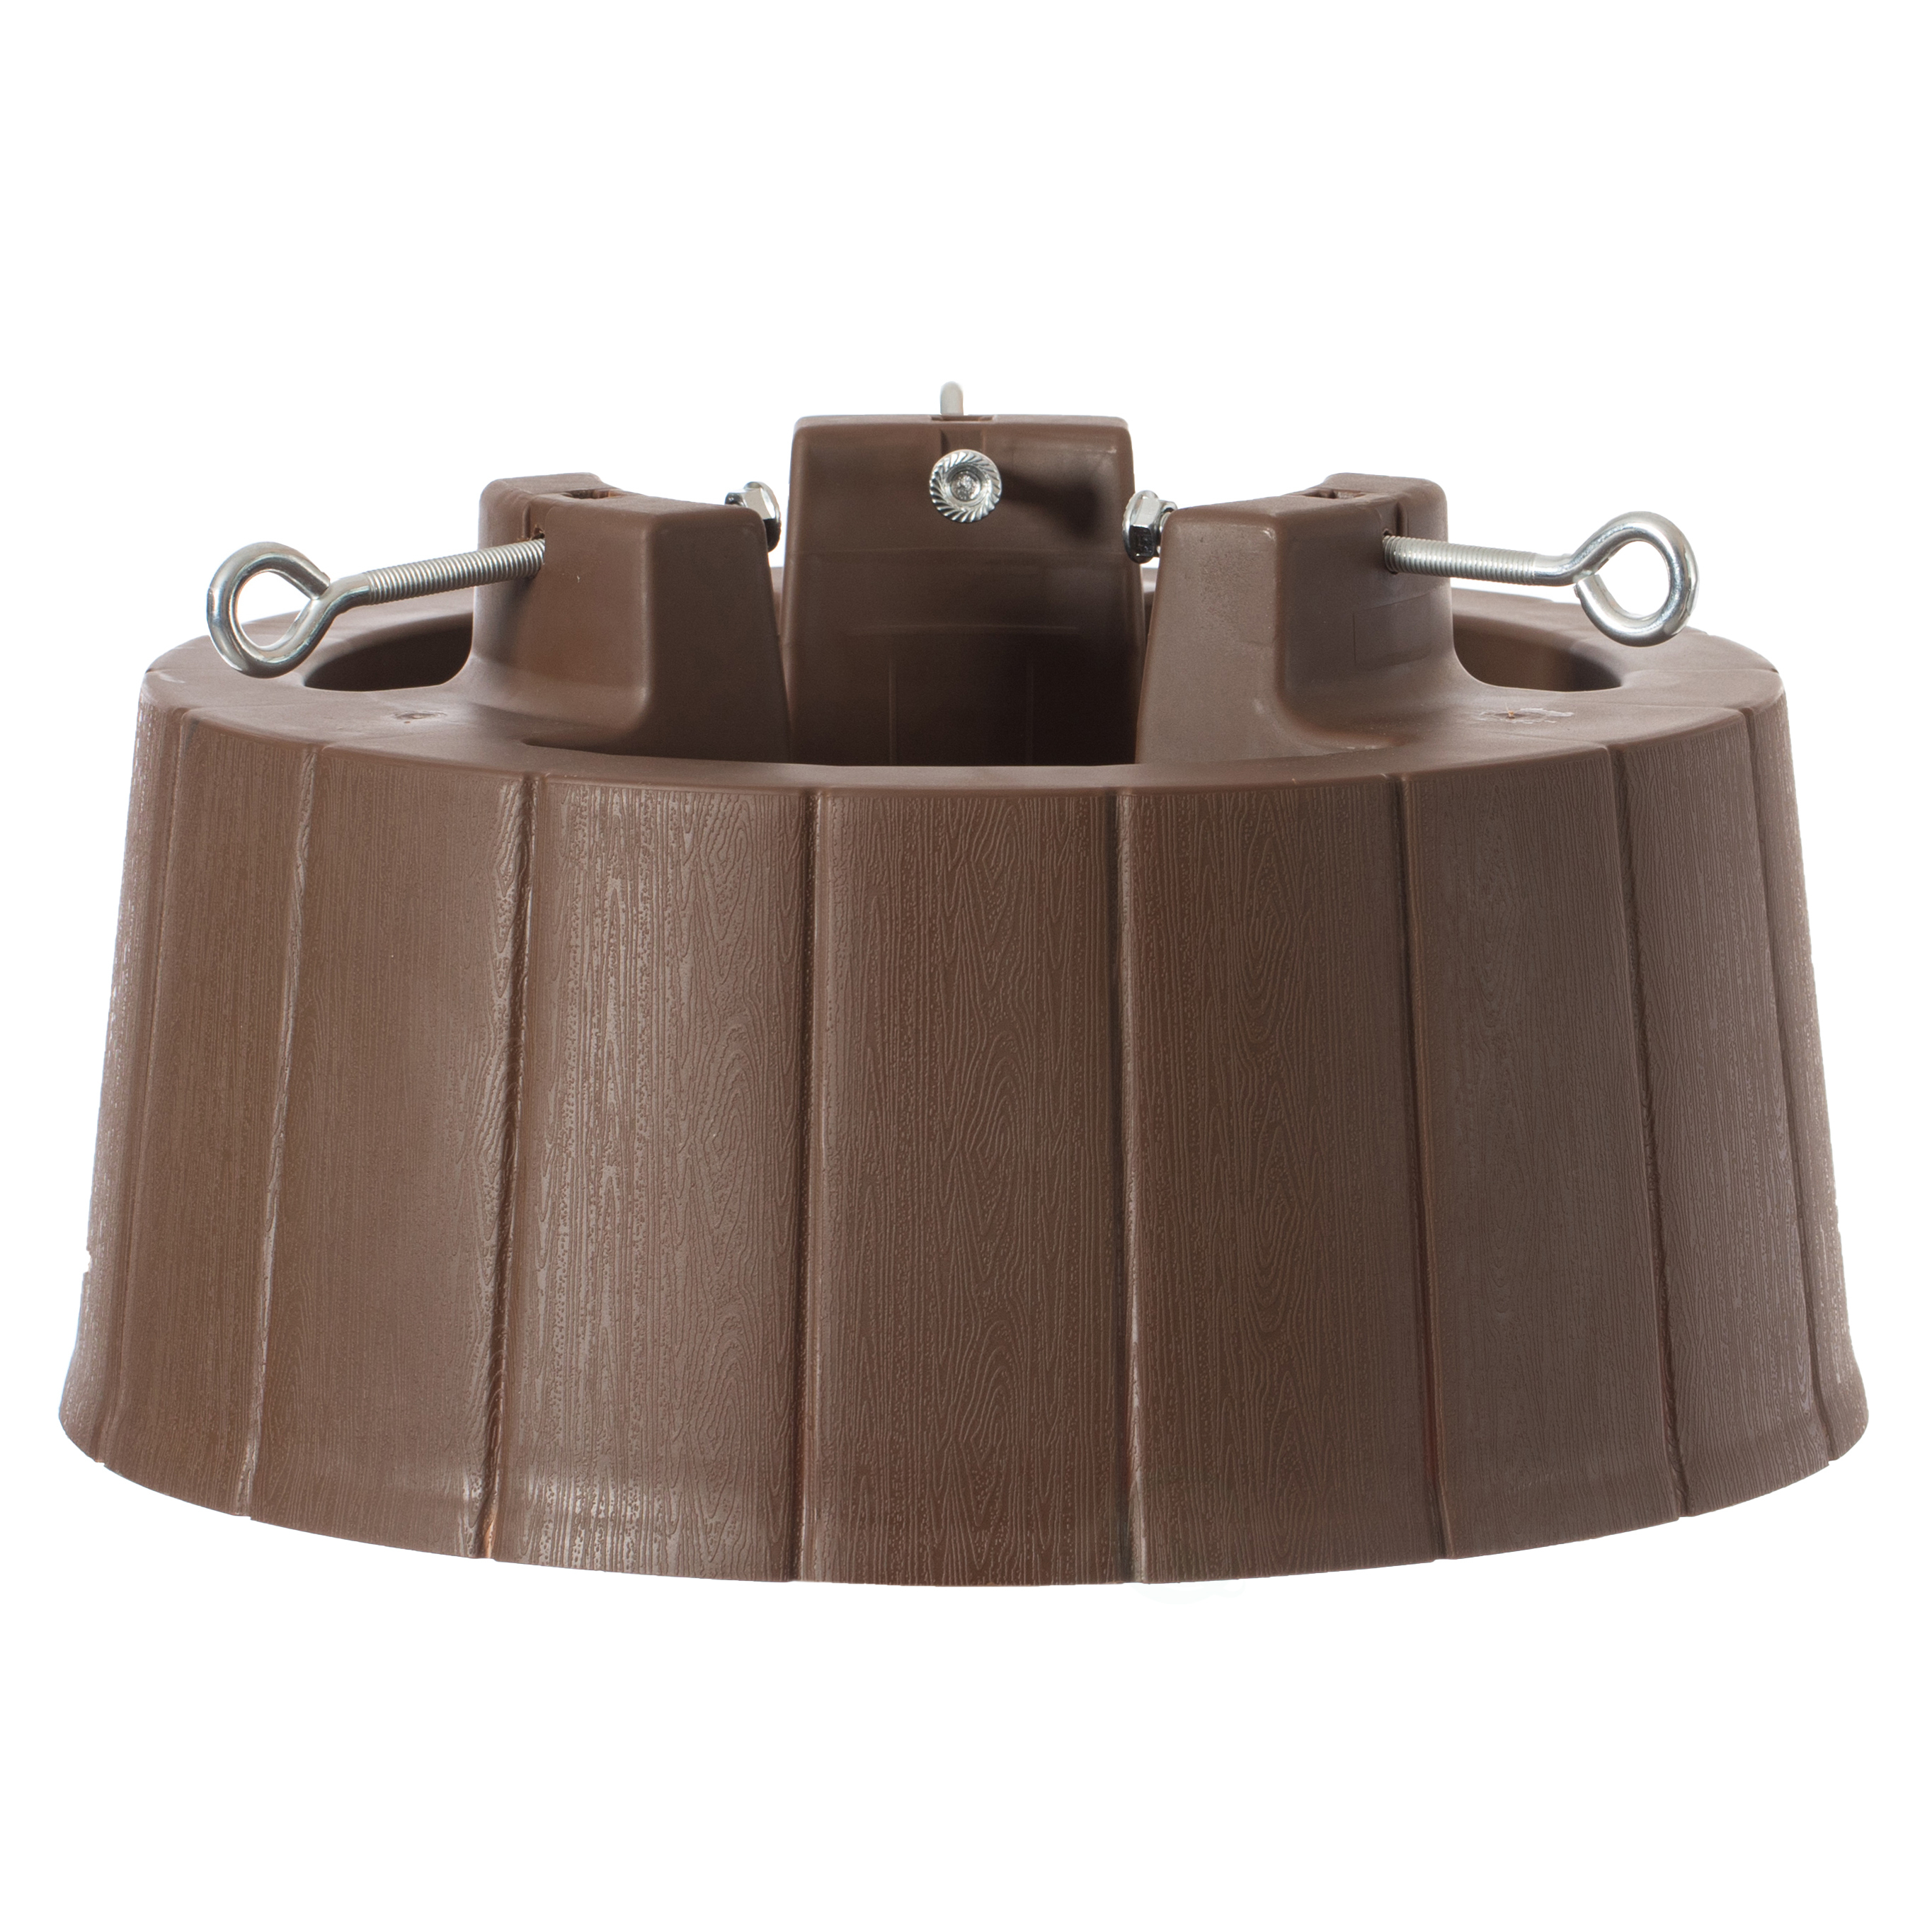 Plastic Christmas Tree Stand With Screw Fastener - Brown